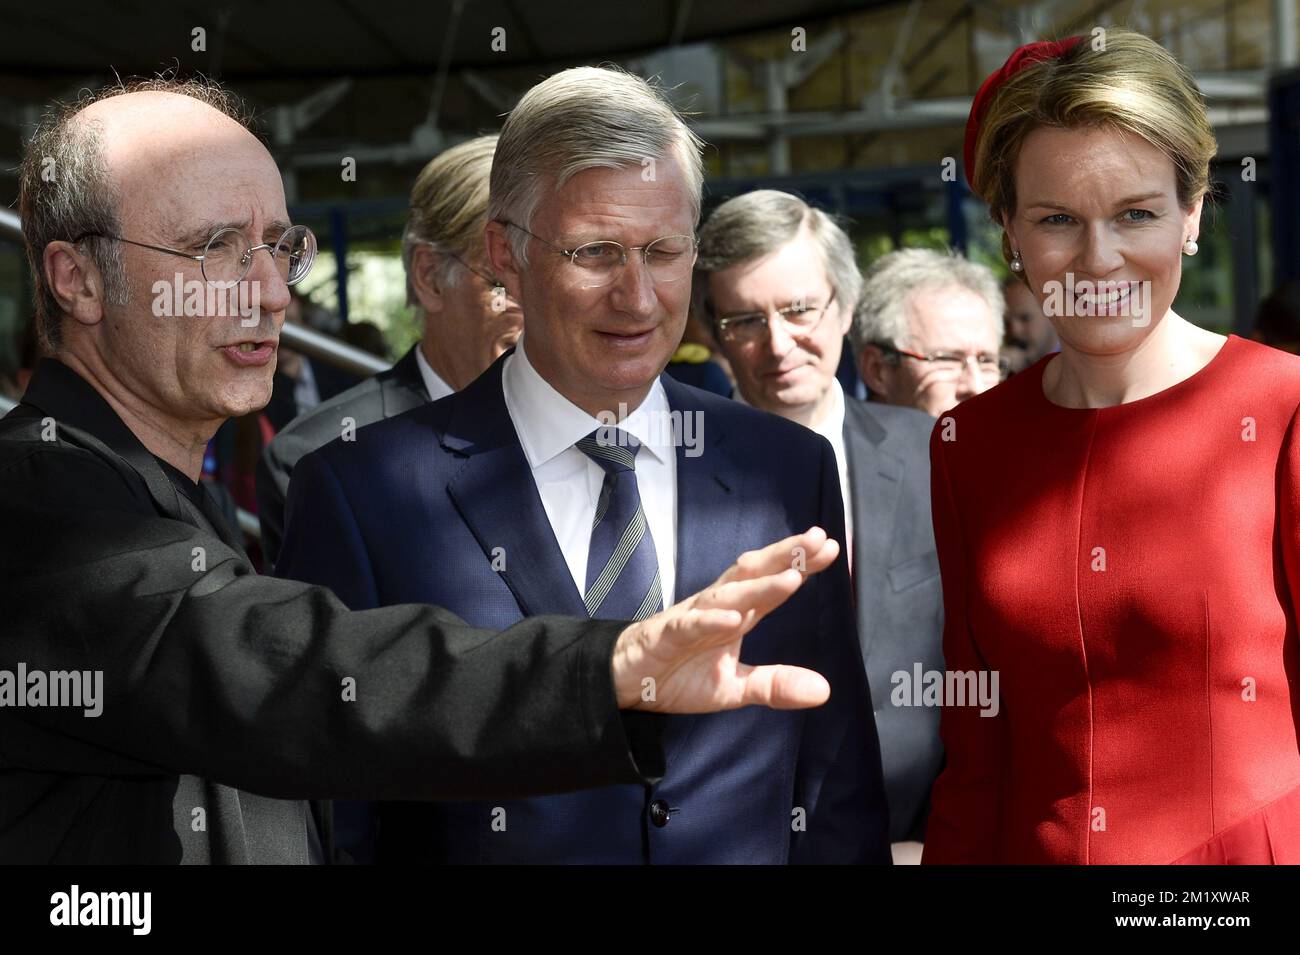 20150421 - STRASBOURG, FRANCE: Cartoonist Philippe Geluck, Queen Mathilde of Belgium and King Philippe - Filip of Belgium pictured during a royal visit to the European Court of Human Rights (ECHR) in Strasbourg, France, Tuesday 21 April 2015. The Belgian Royals are visiting Today in Strasbourg the Council of Europe, the European Court of Human Rights and the Eurocorps. BELGA PHOTO DIRK WAEM Stock Photo